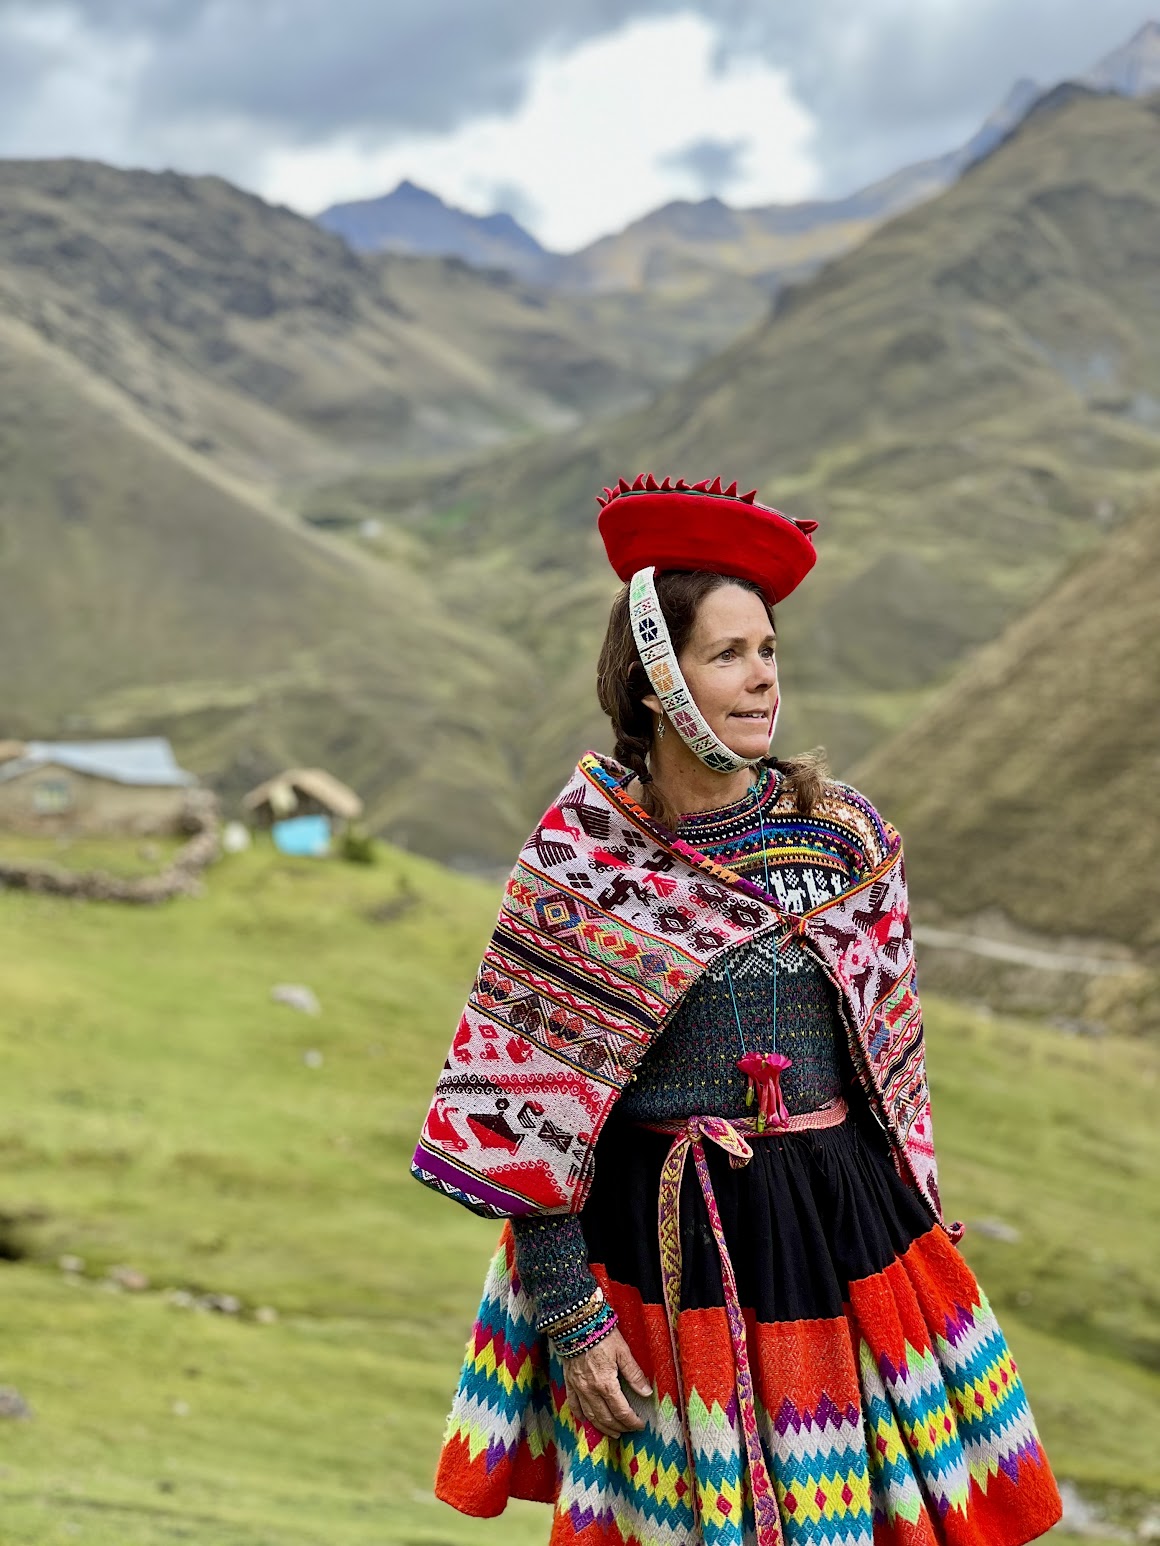 Image is of a woman in colorful clothing standing atop a mountain